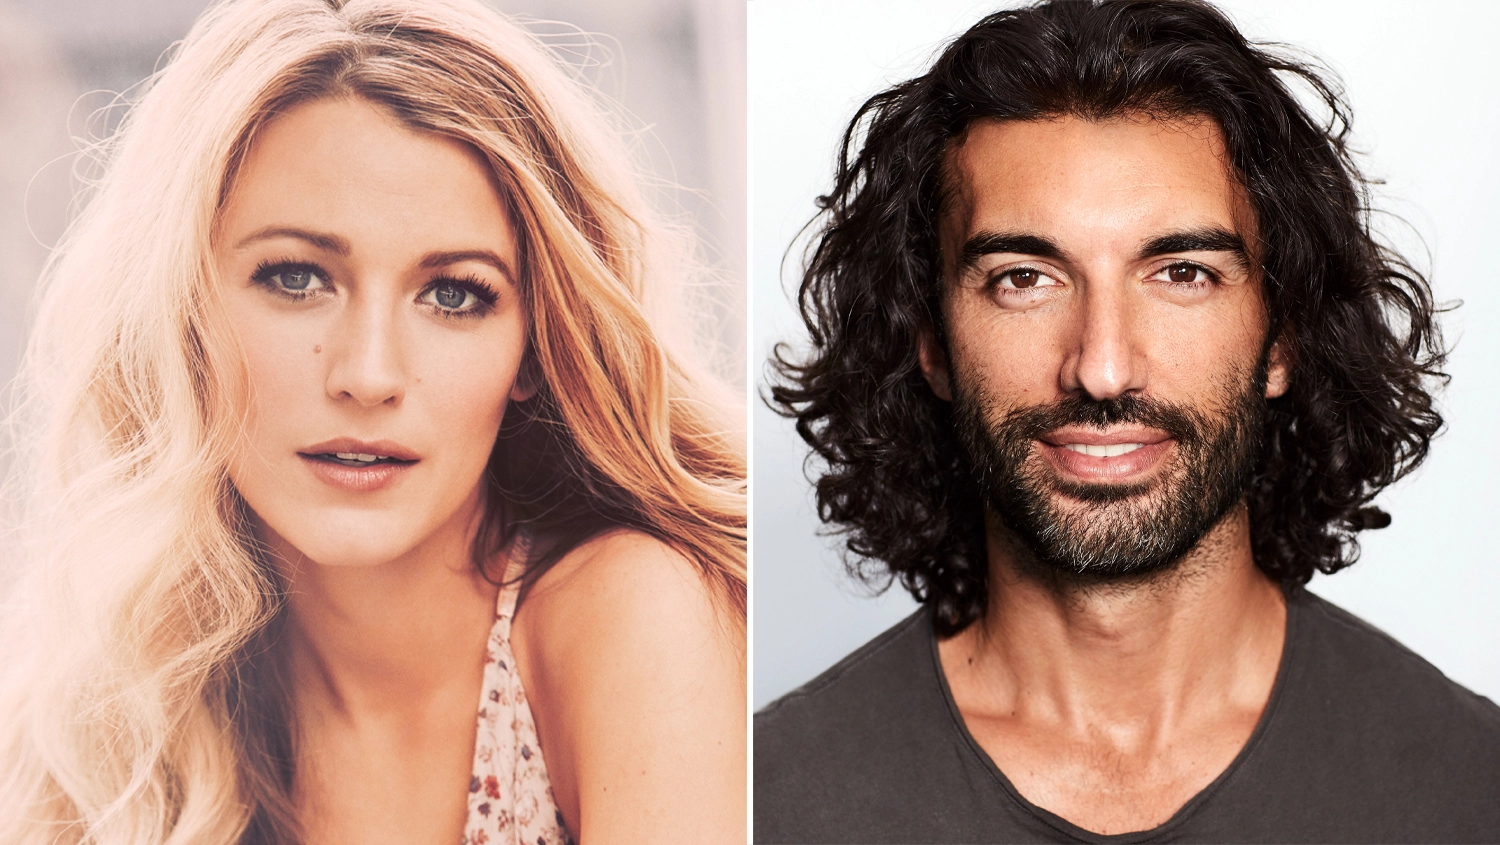 Blake Lively and Justin Baldoni, the actors who were chosen to play the pivotal characters in the film.